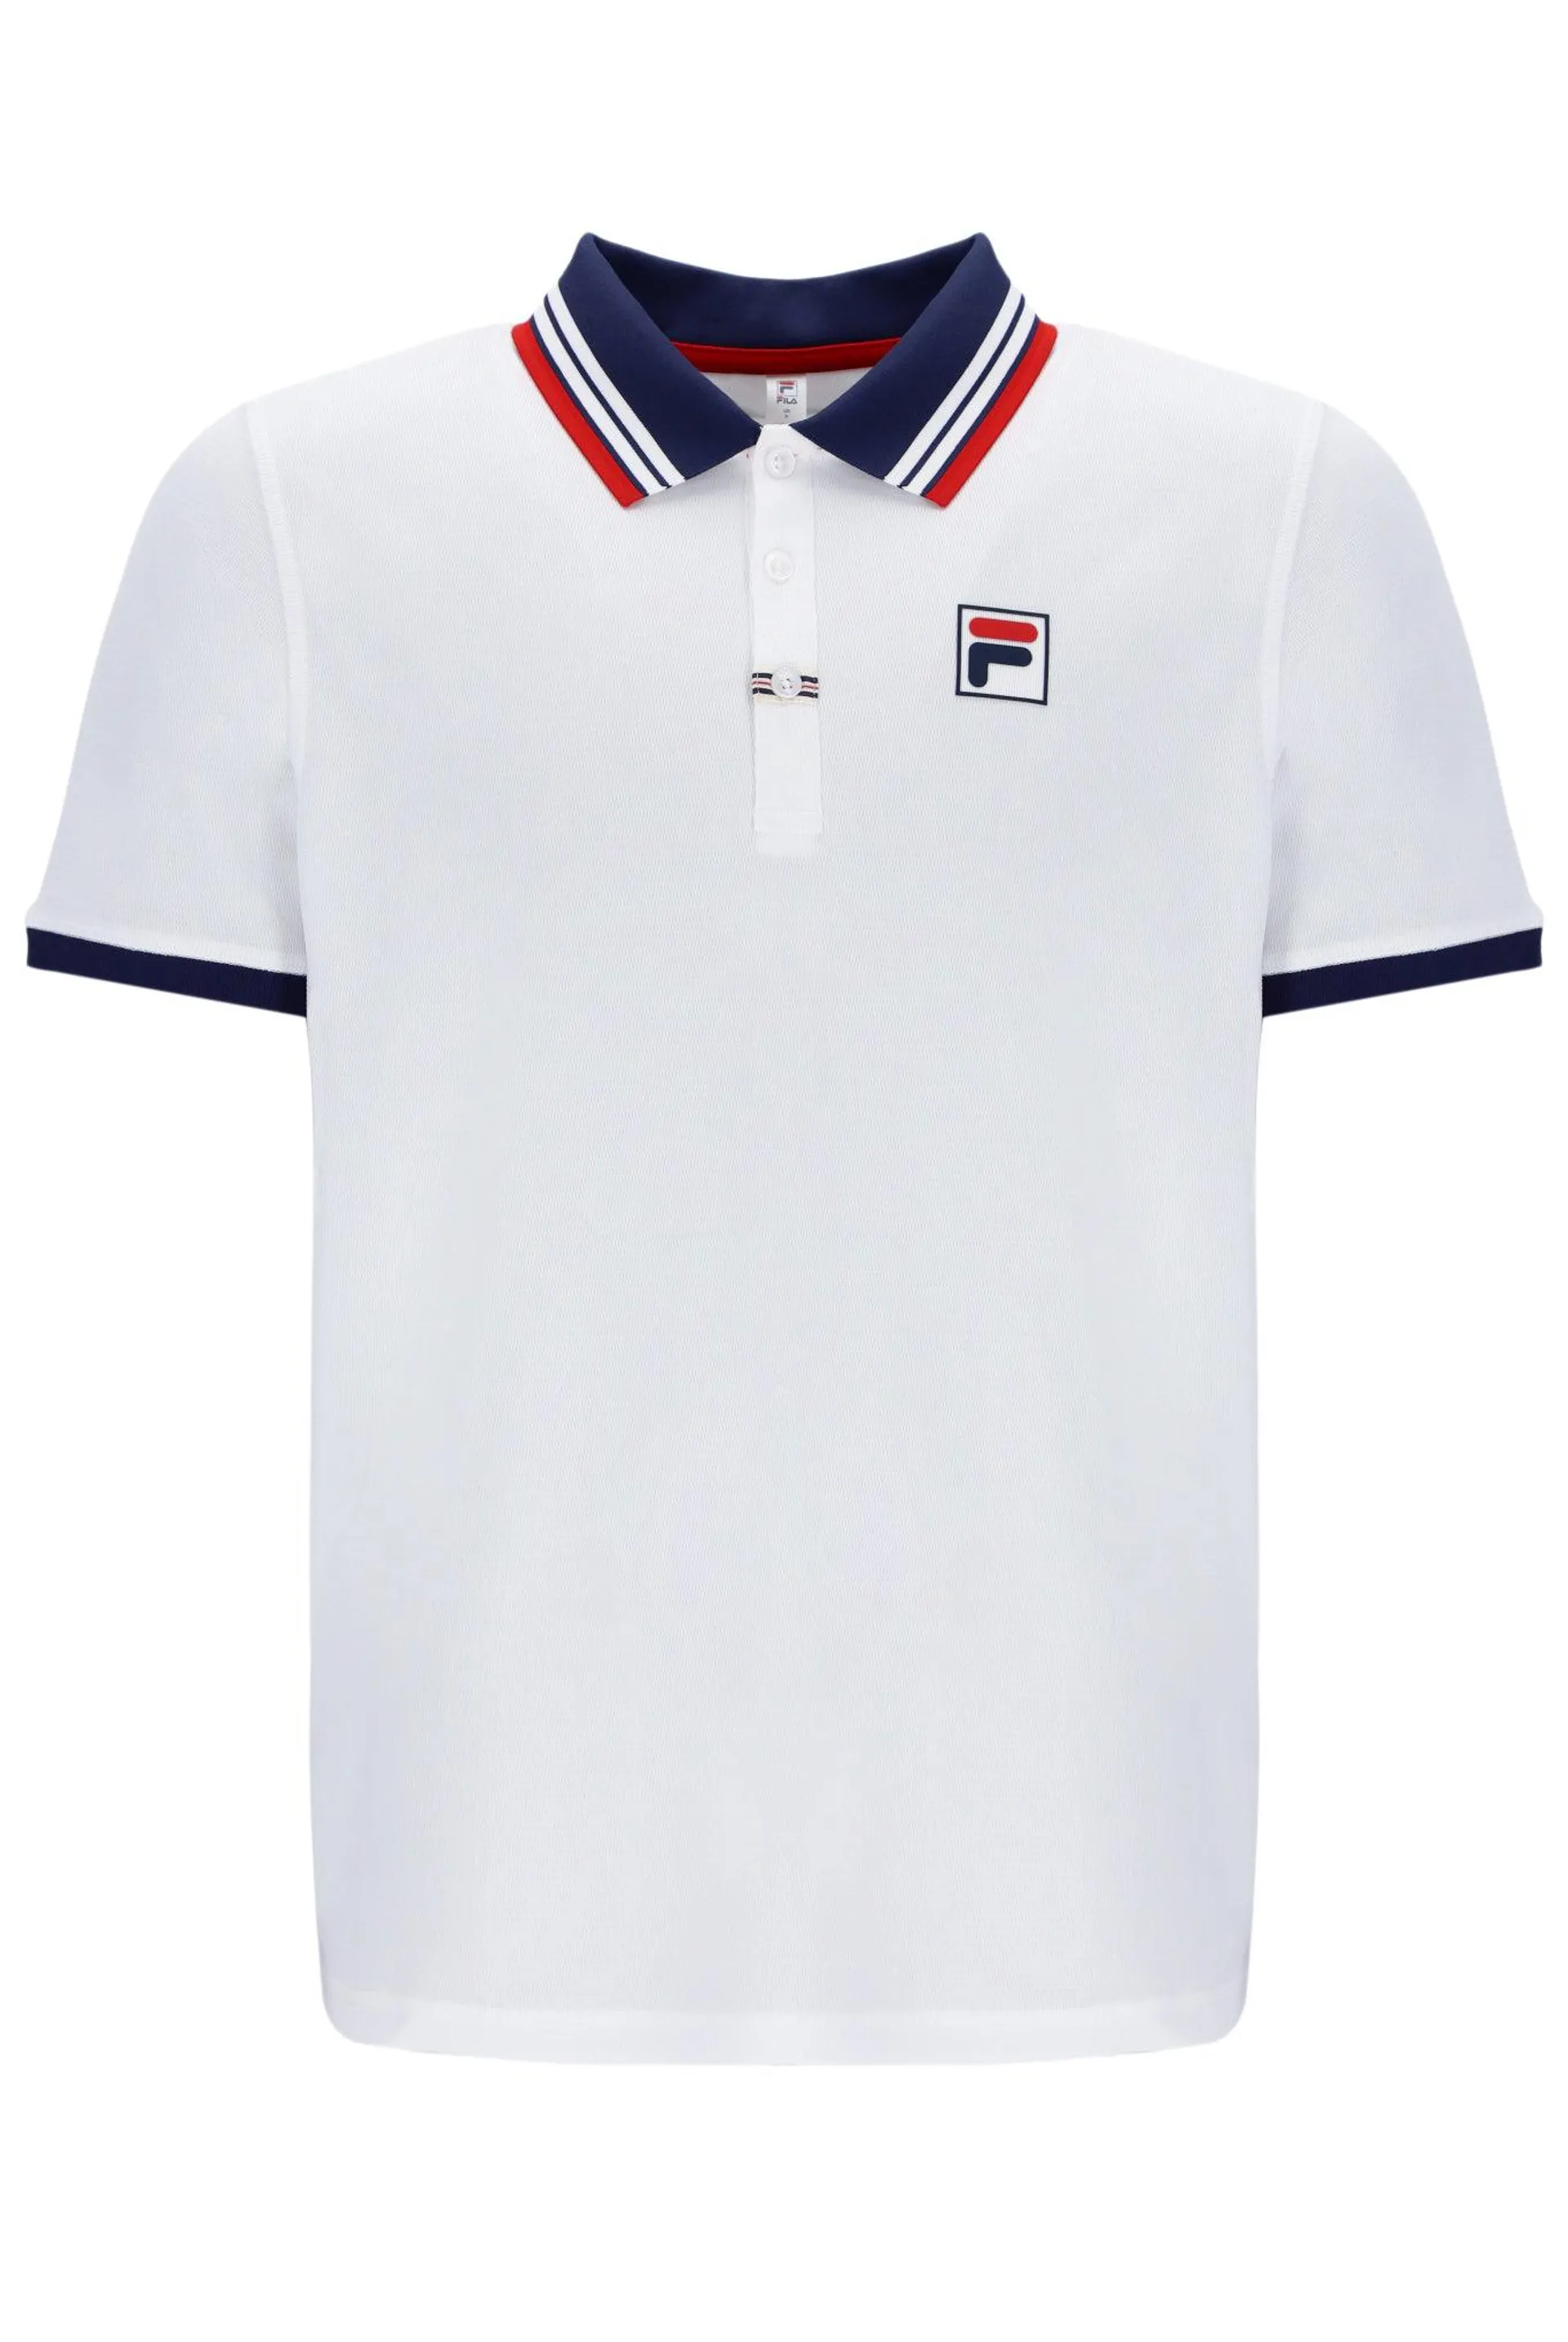 Heritage S/S Solid Polo